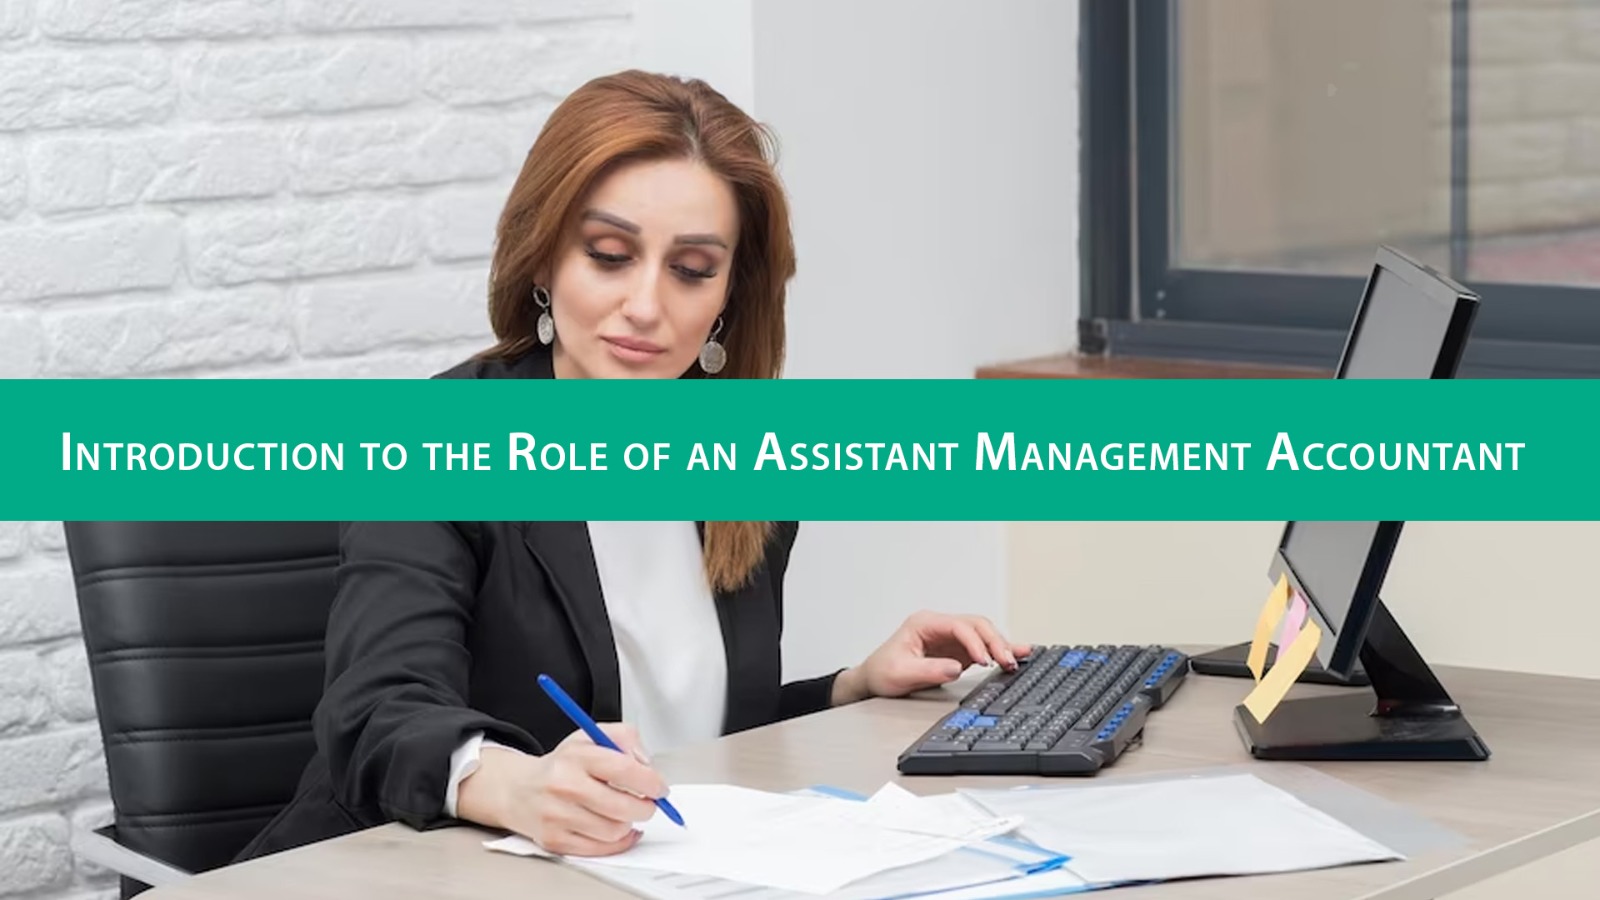 Introduction to the Role of an Assistant Management Accountant